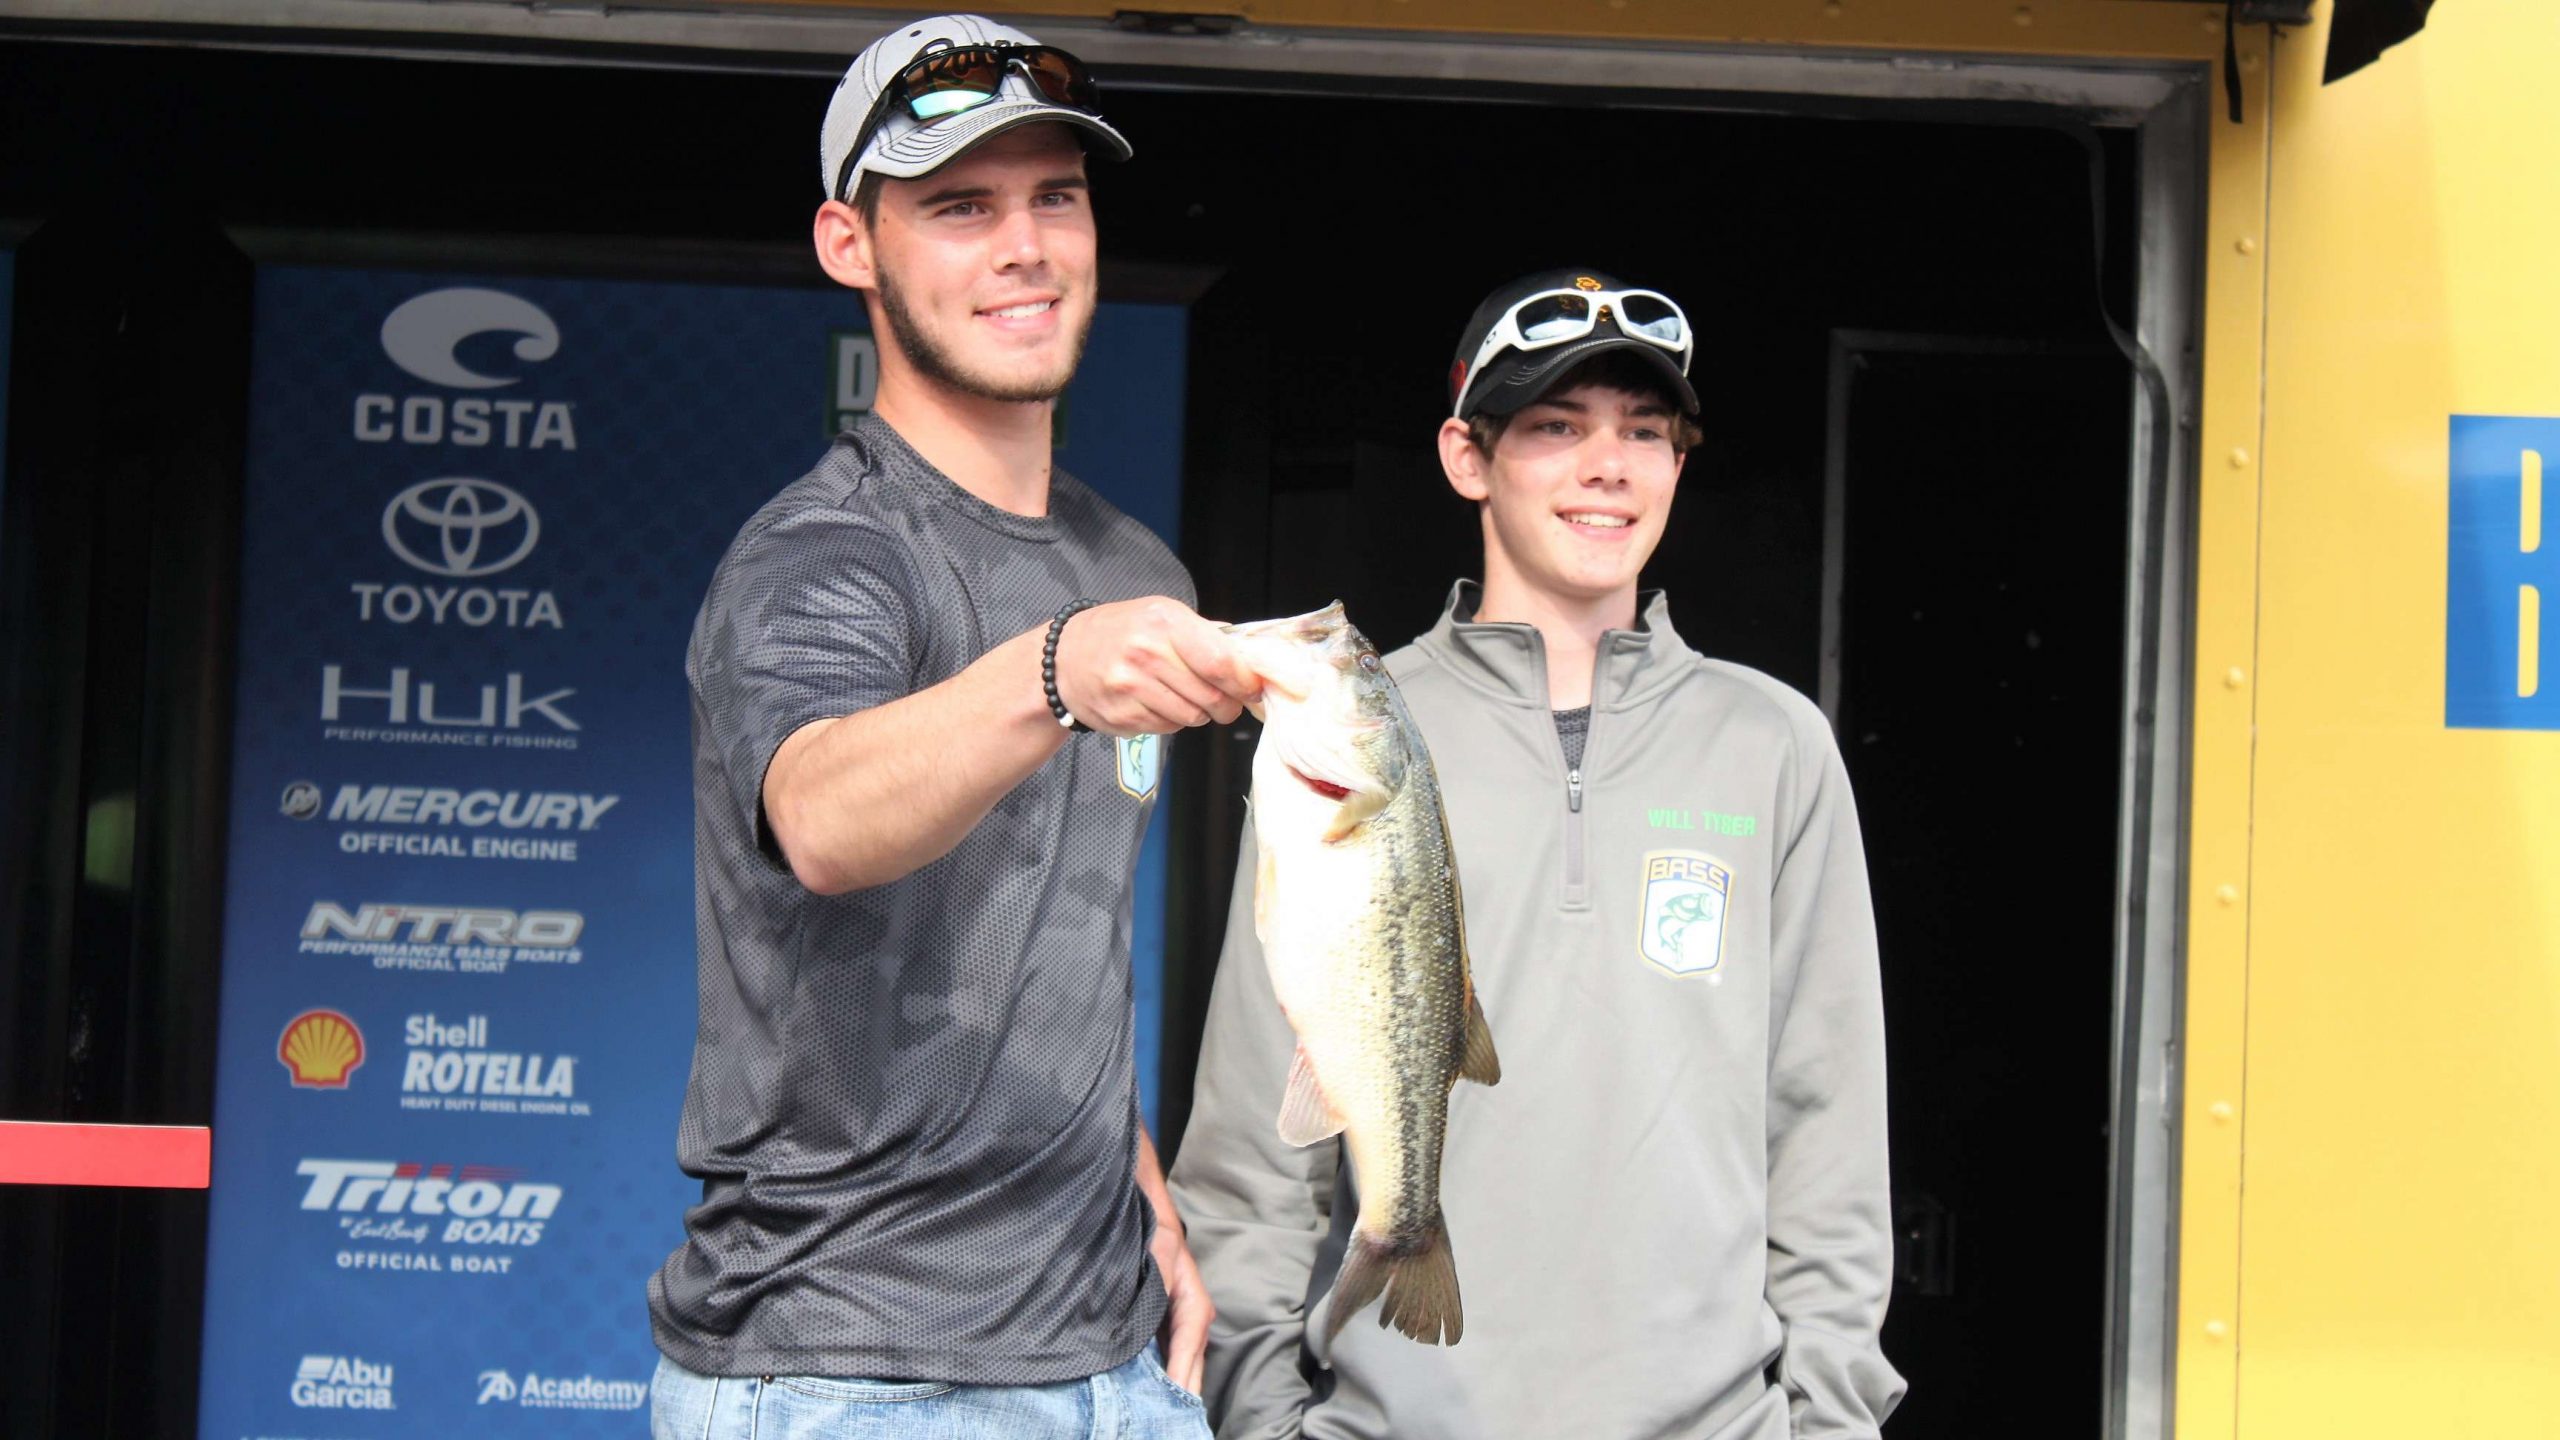 Brooks and Will Tyser are the first high school team from Wyoming to enter a Bassmaster High School event. They only caught one fish that weighed 2-15, but the High Plains Bass Club has set roots out west that will bear fruit in coming tournaments, for sure.